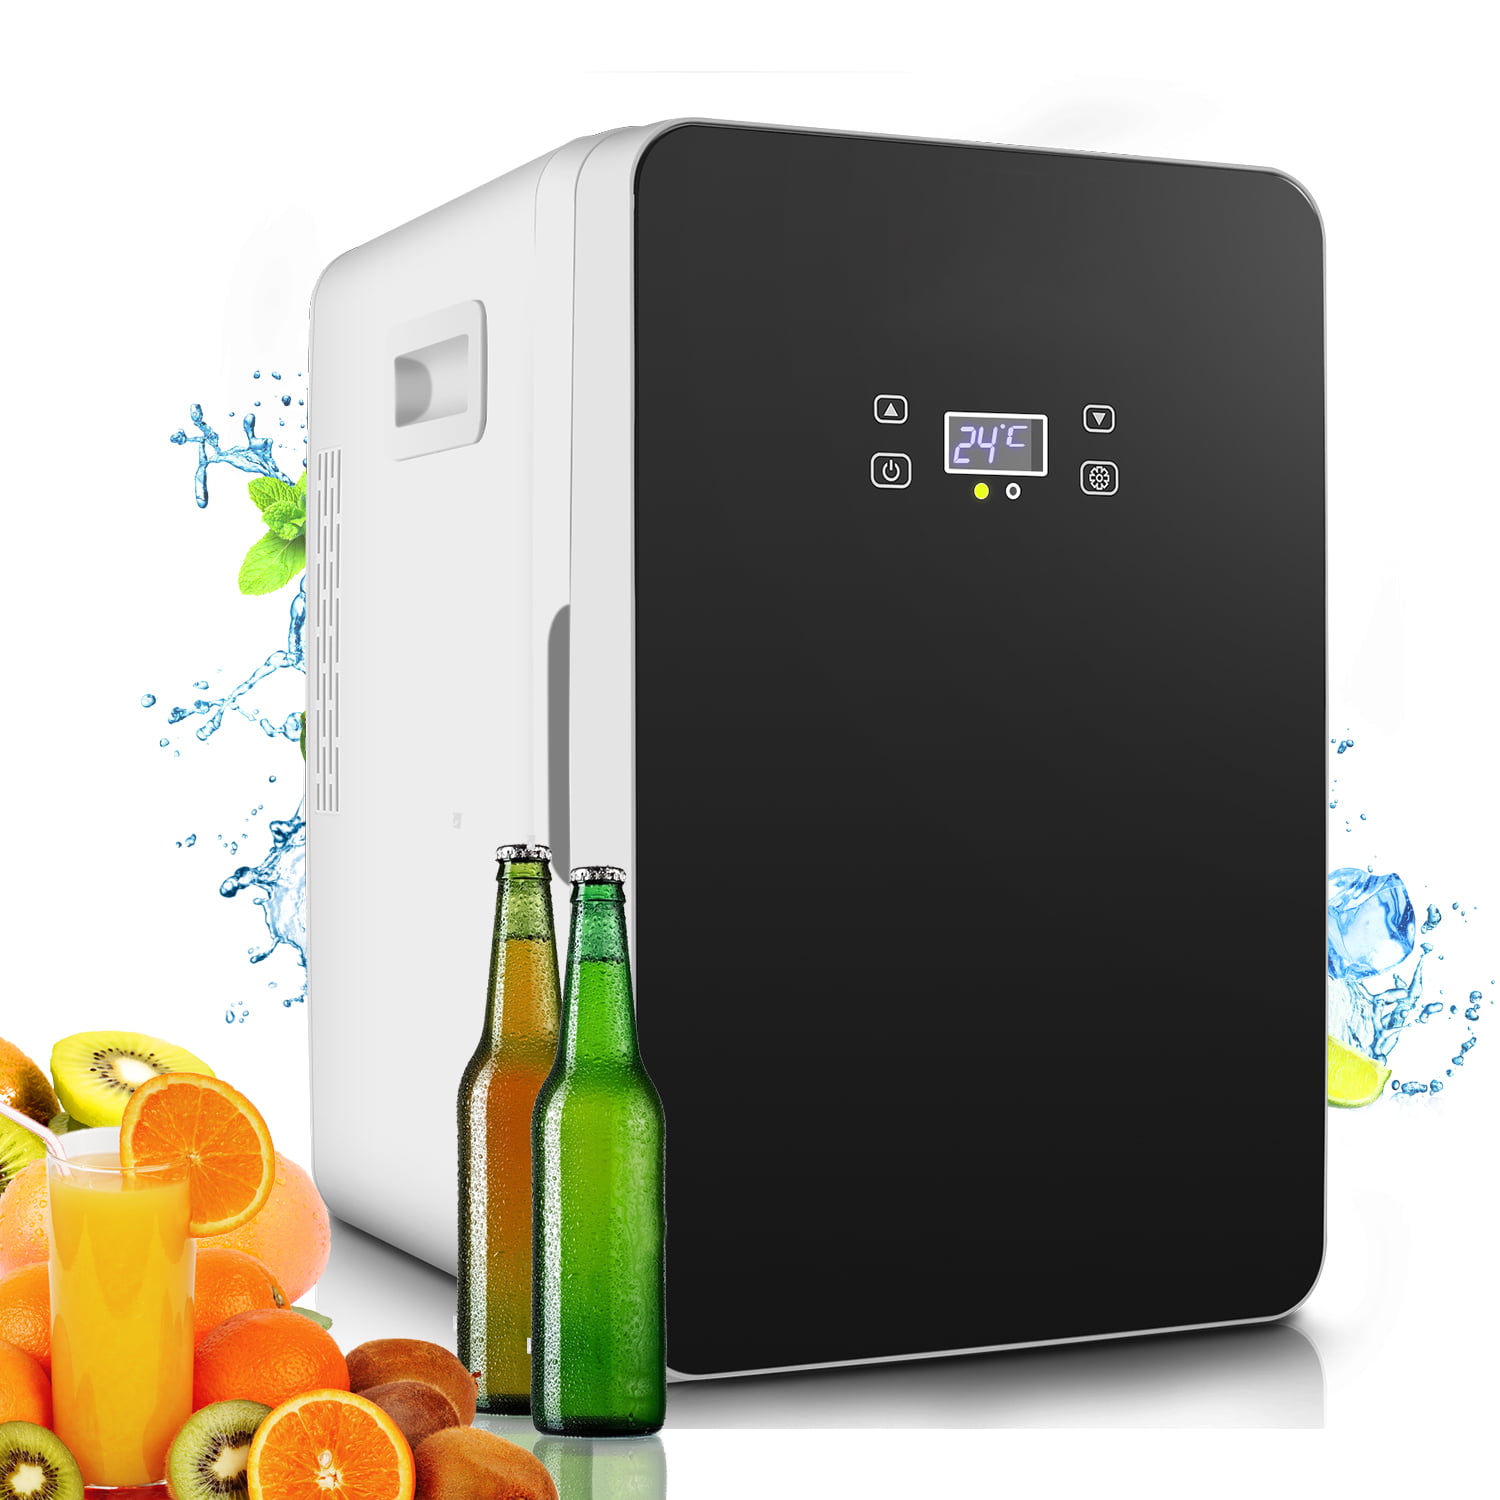 20L Portable Electric Mini Refrigerator, Compact Beer Drink Fridge Cooler and Warmer 60W Low